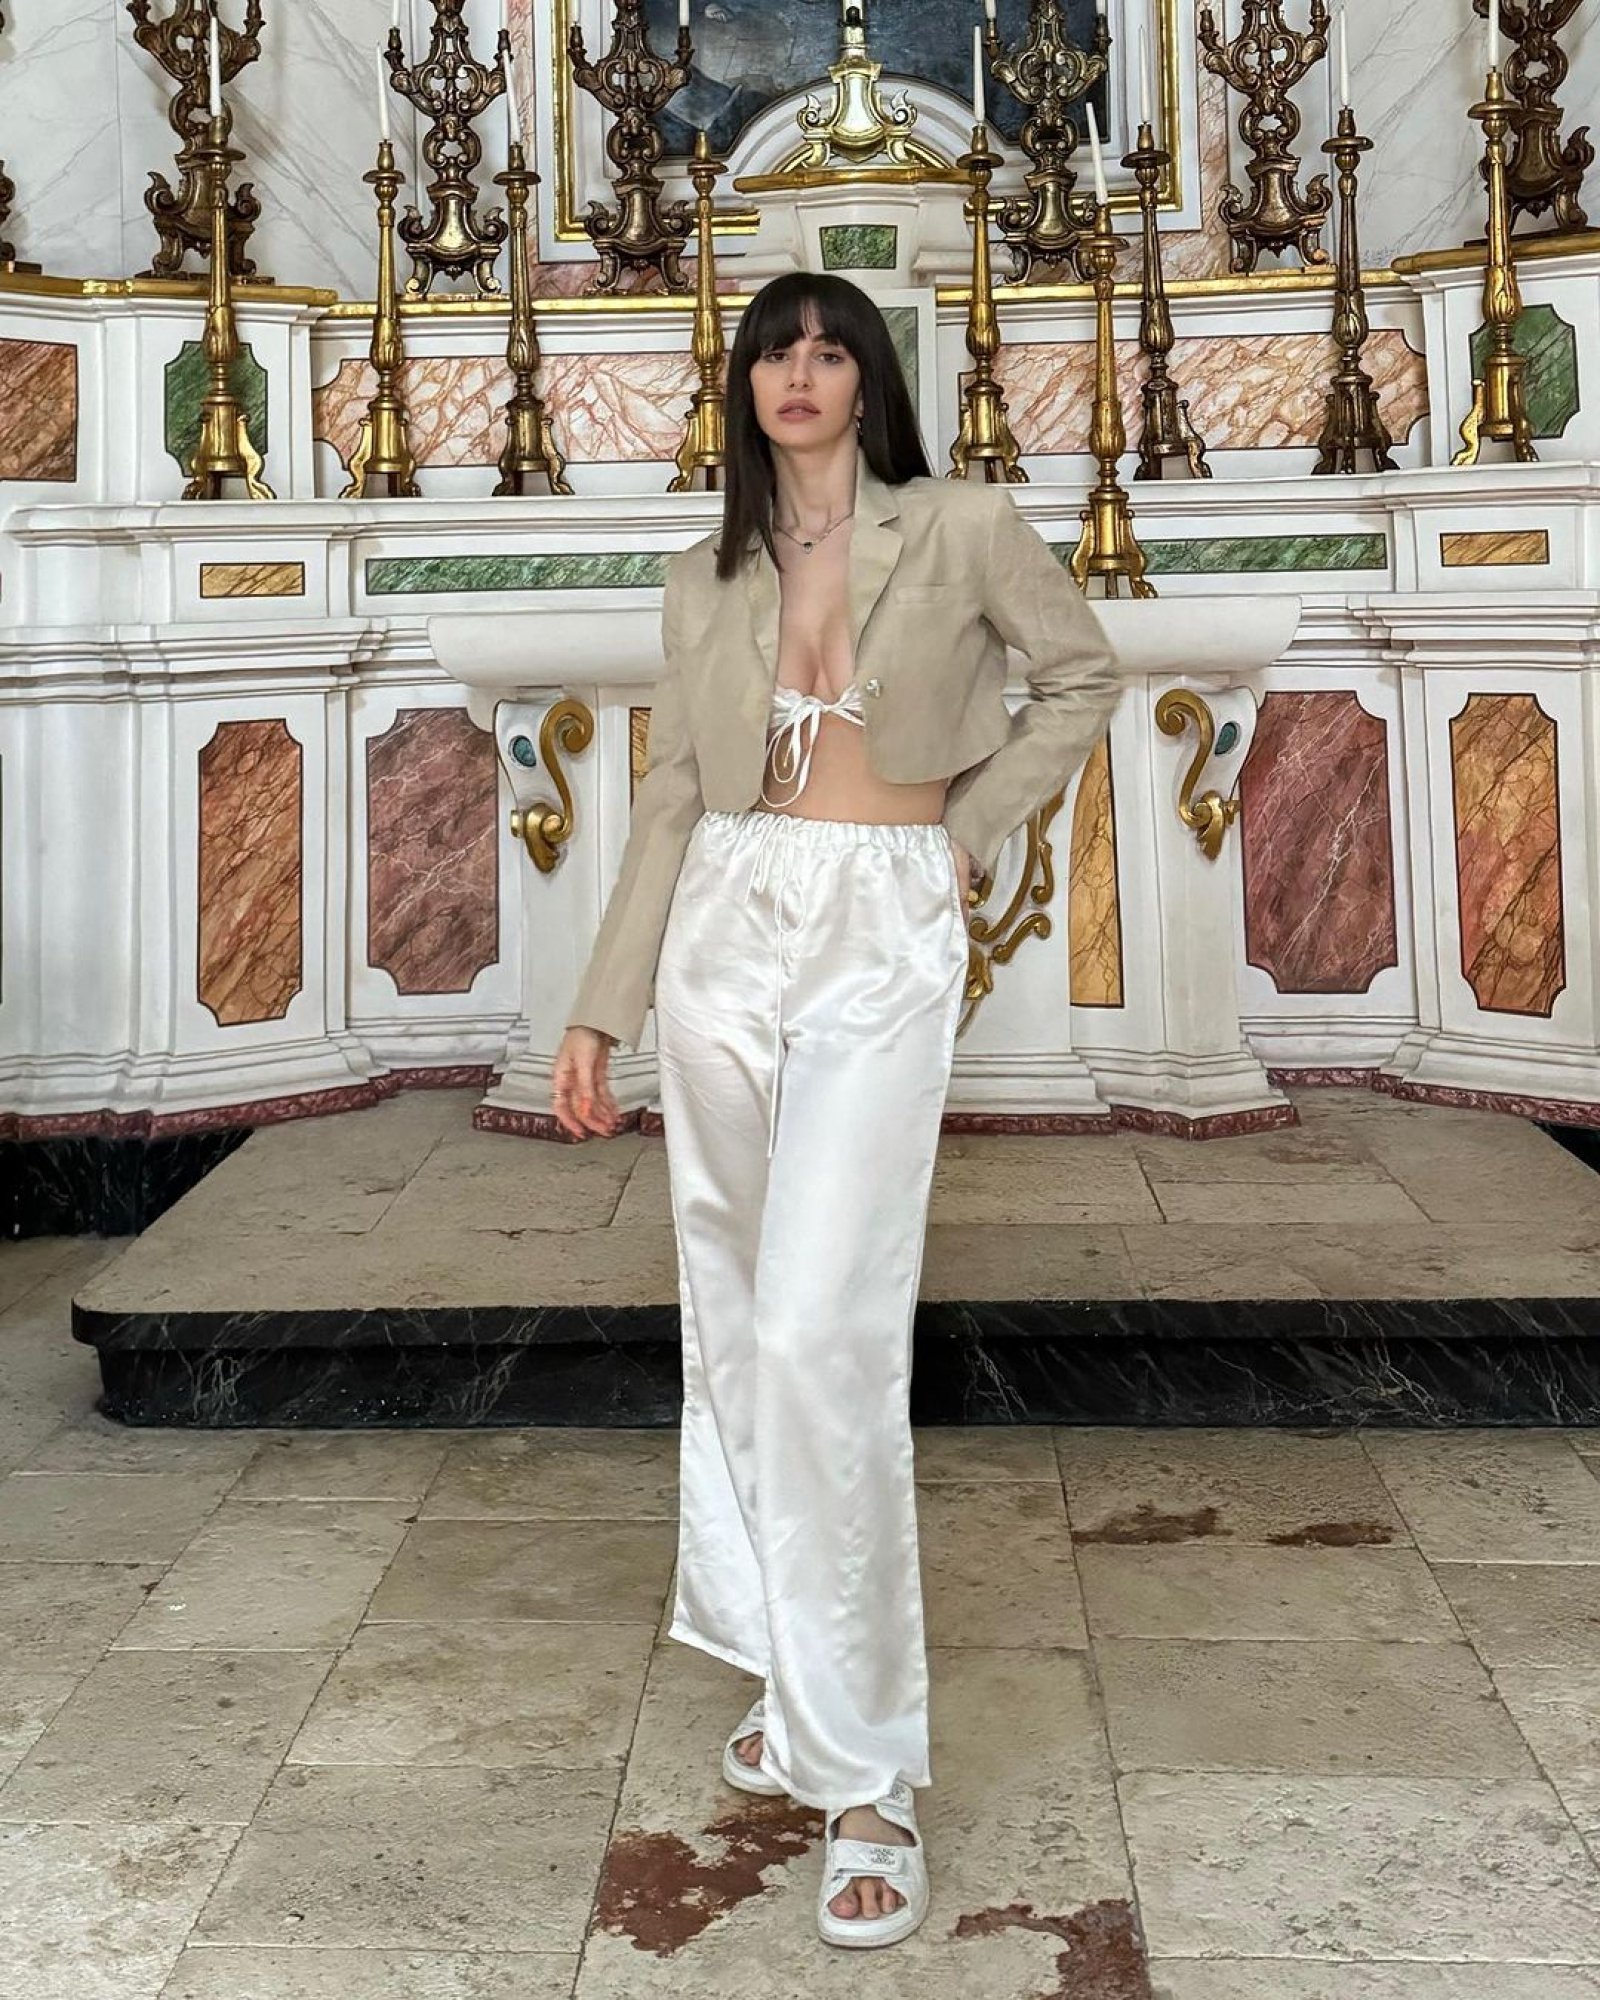 Giorgia Andriani Flaunts Her Toned Midriff As She Shares A Dump Of Pictures From Her Trip To Italy, Puglia A Rural Region Full Of Its Unique Character, Calls It, 'Magical'